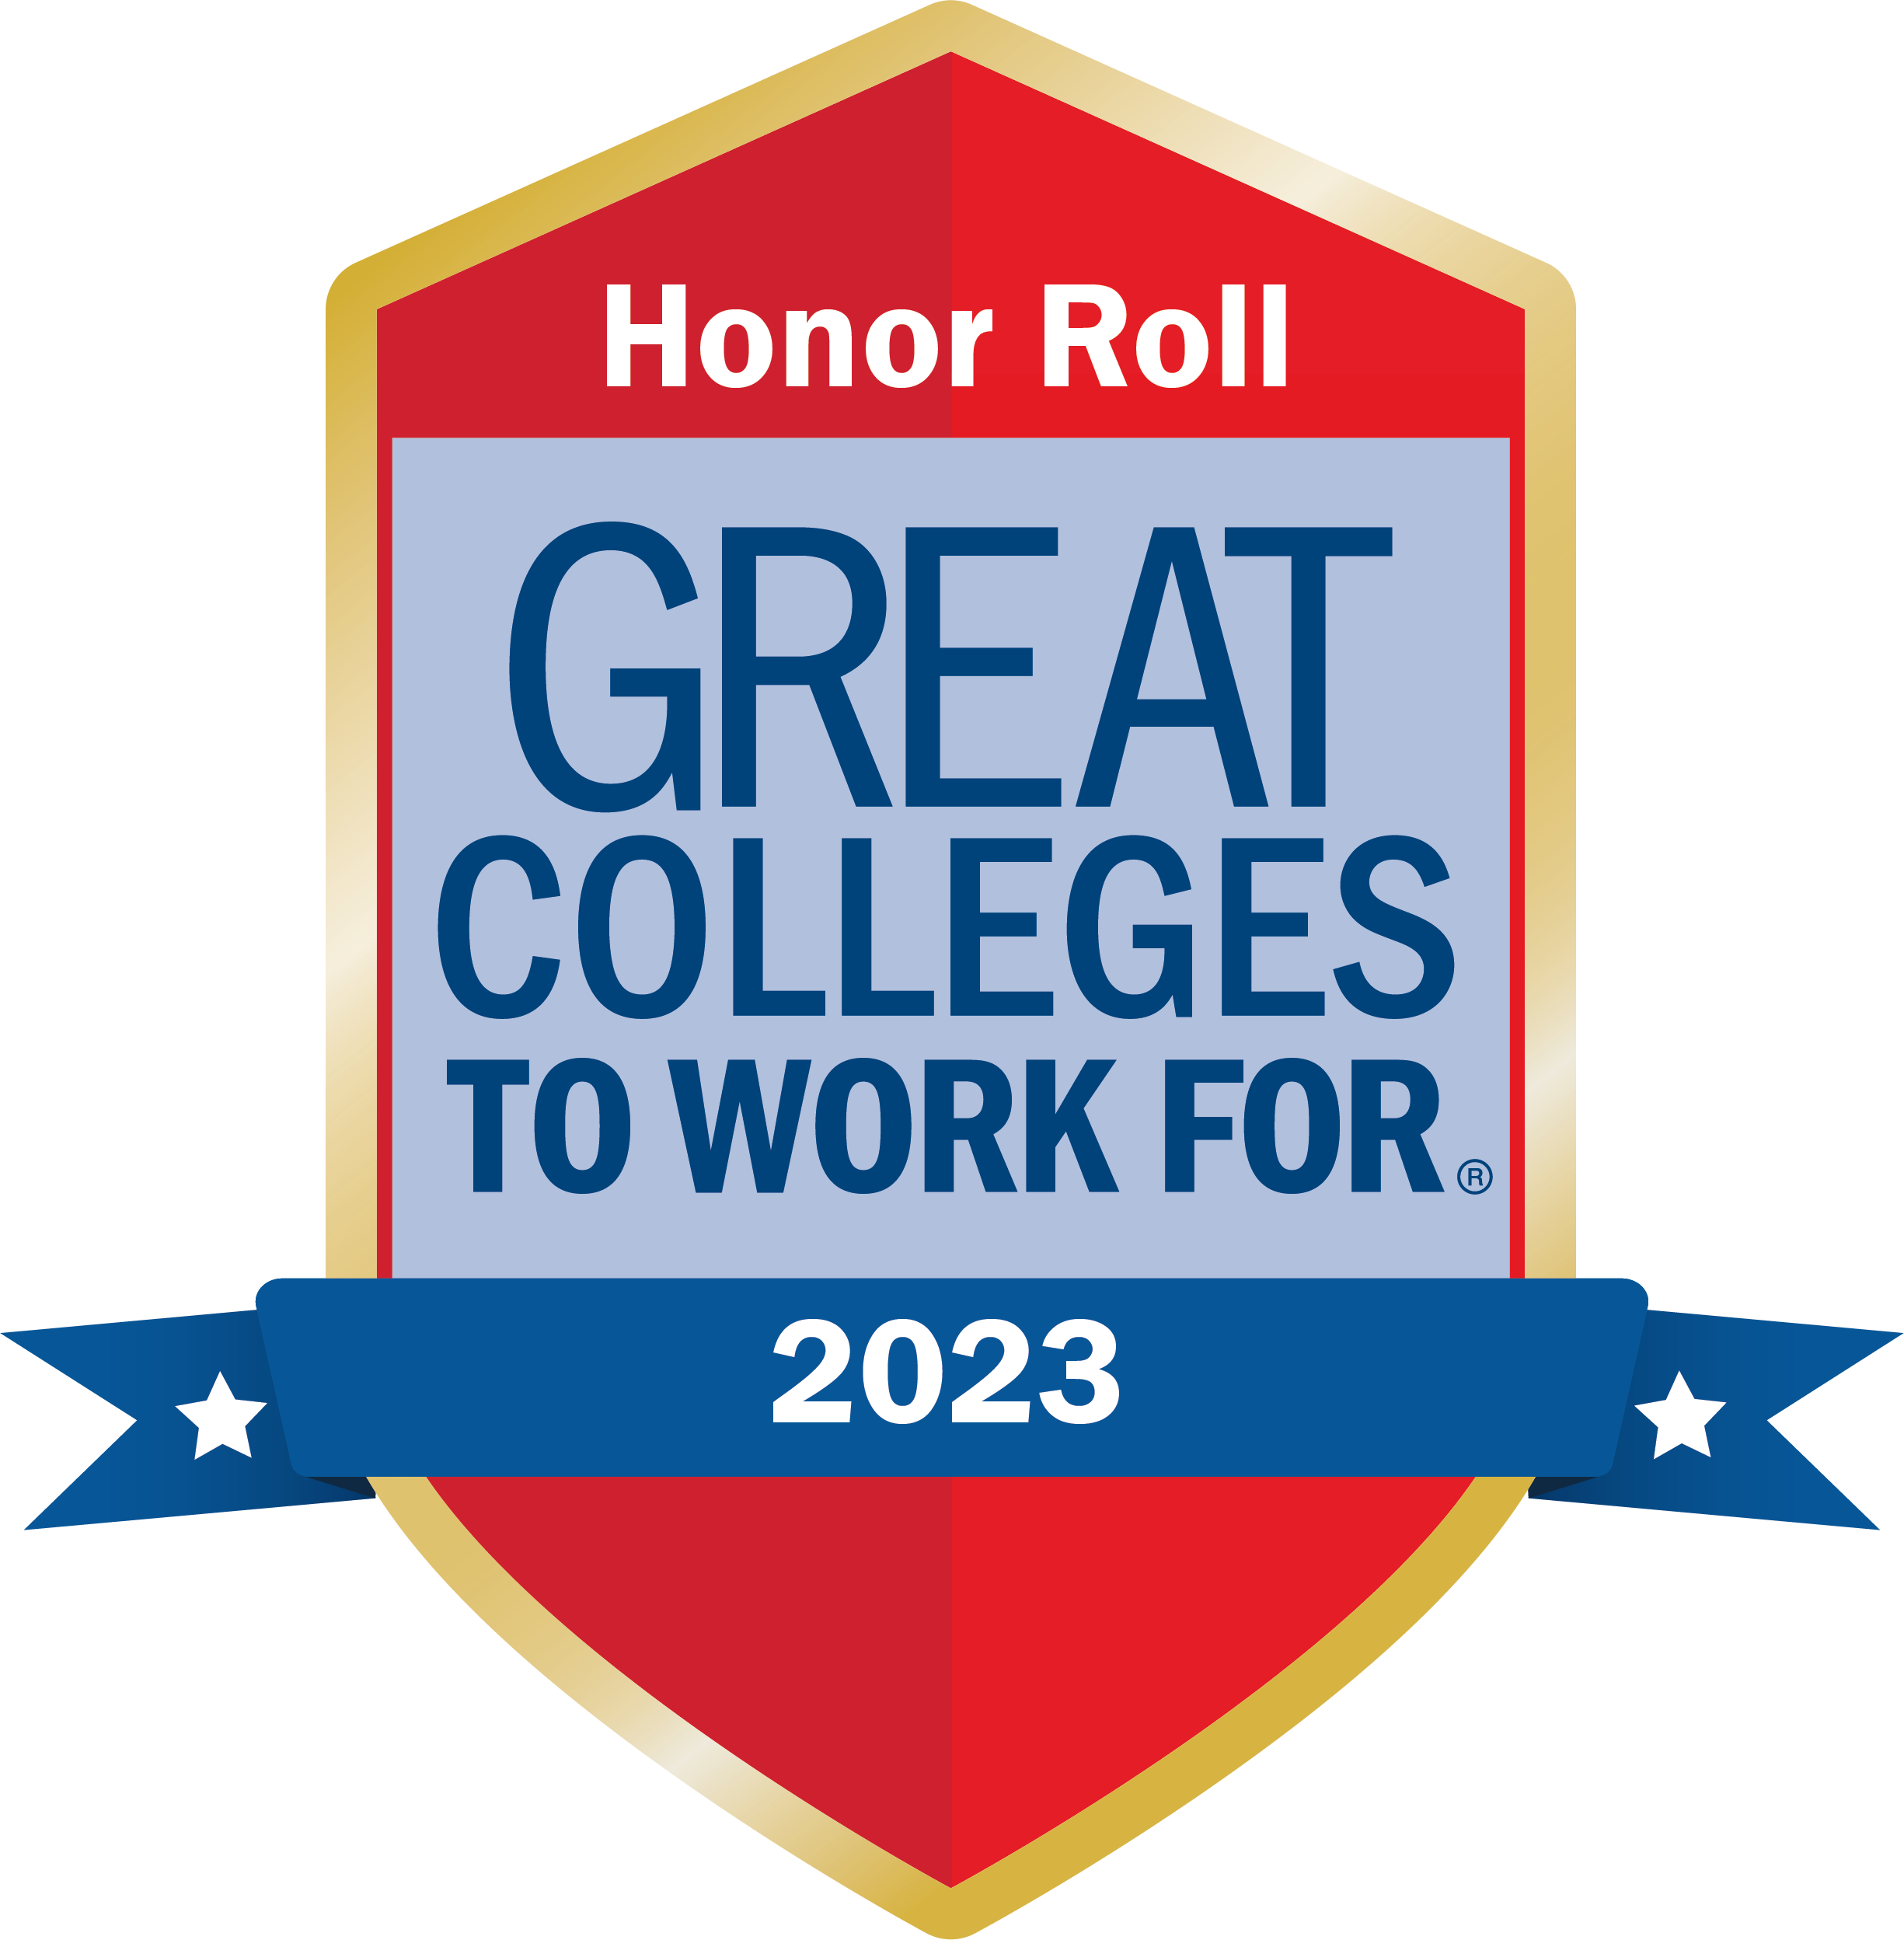 In 2023, 澳门六合彩投注 was once again recognized as a great college to work for.